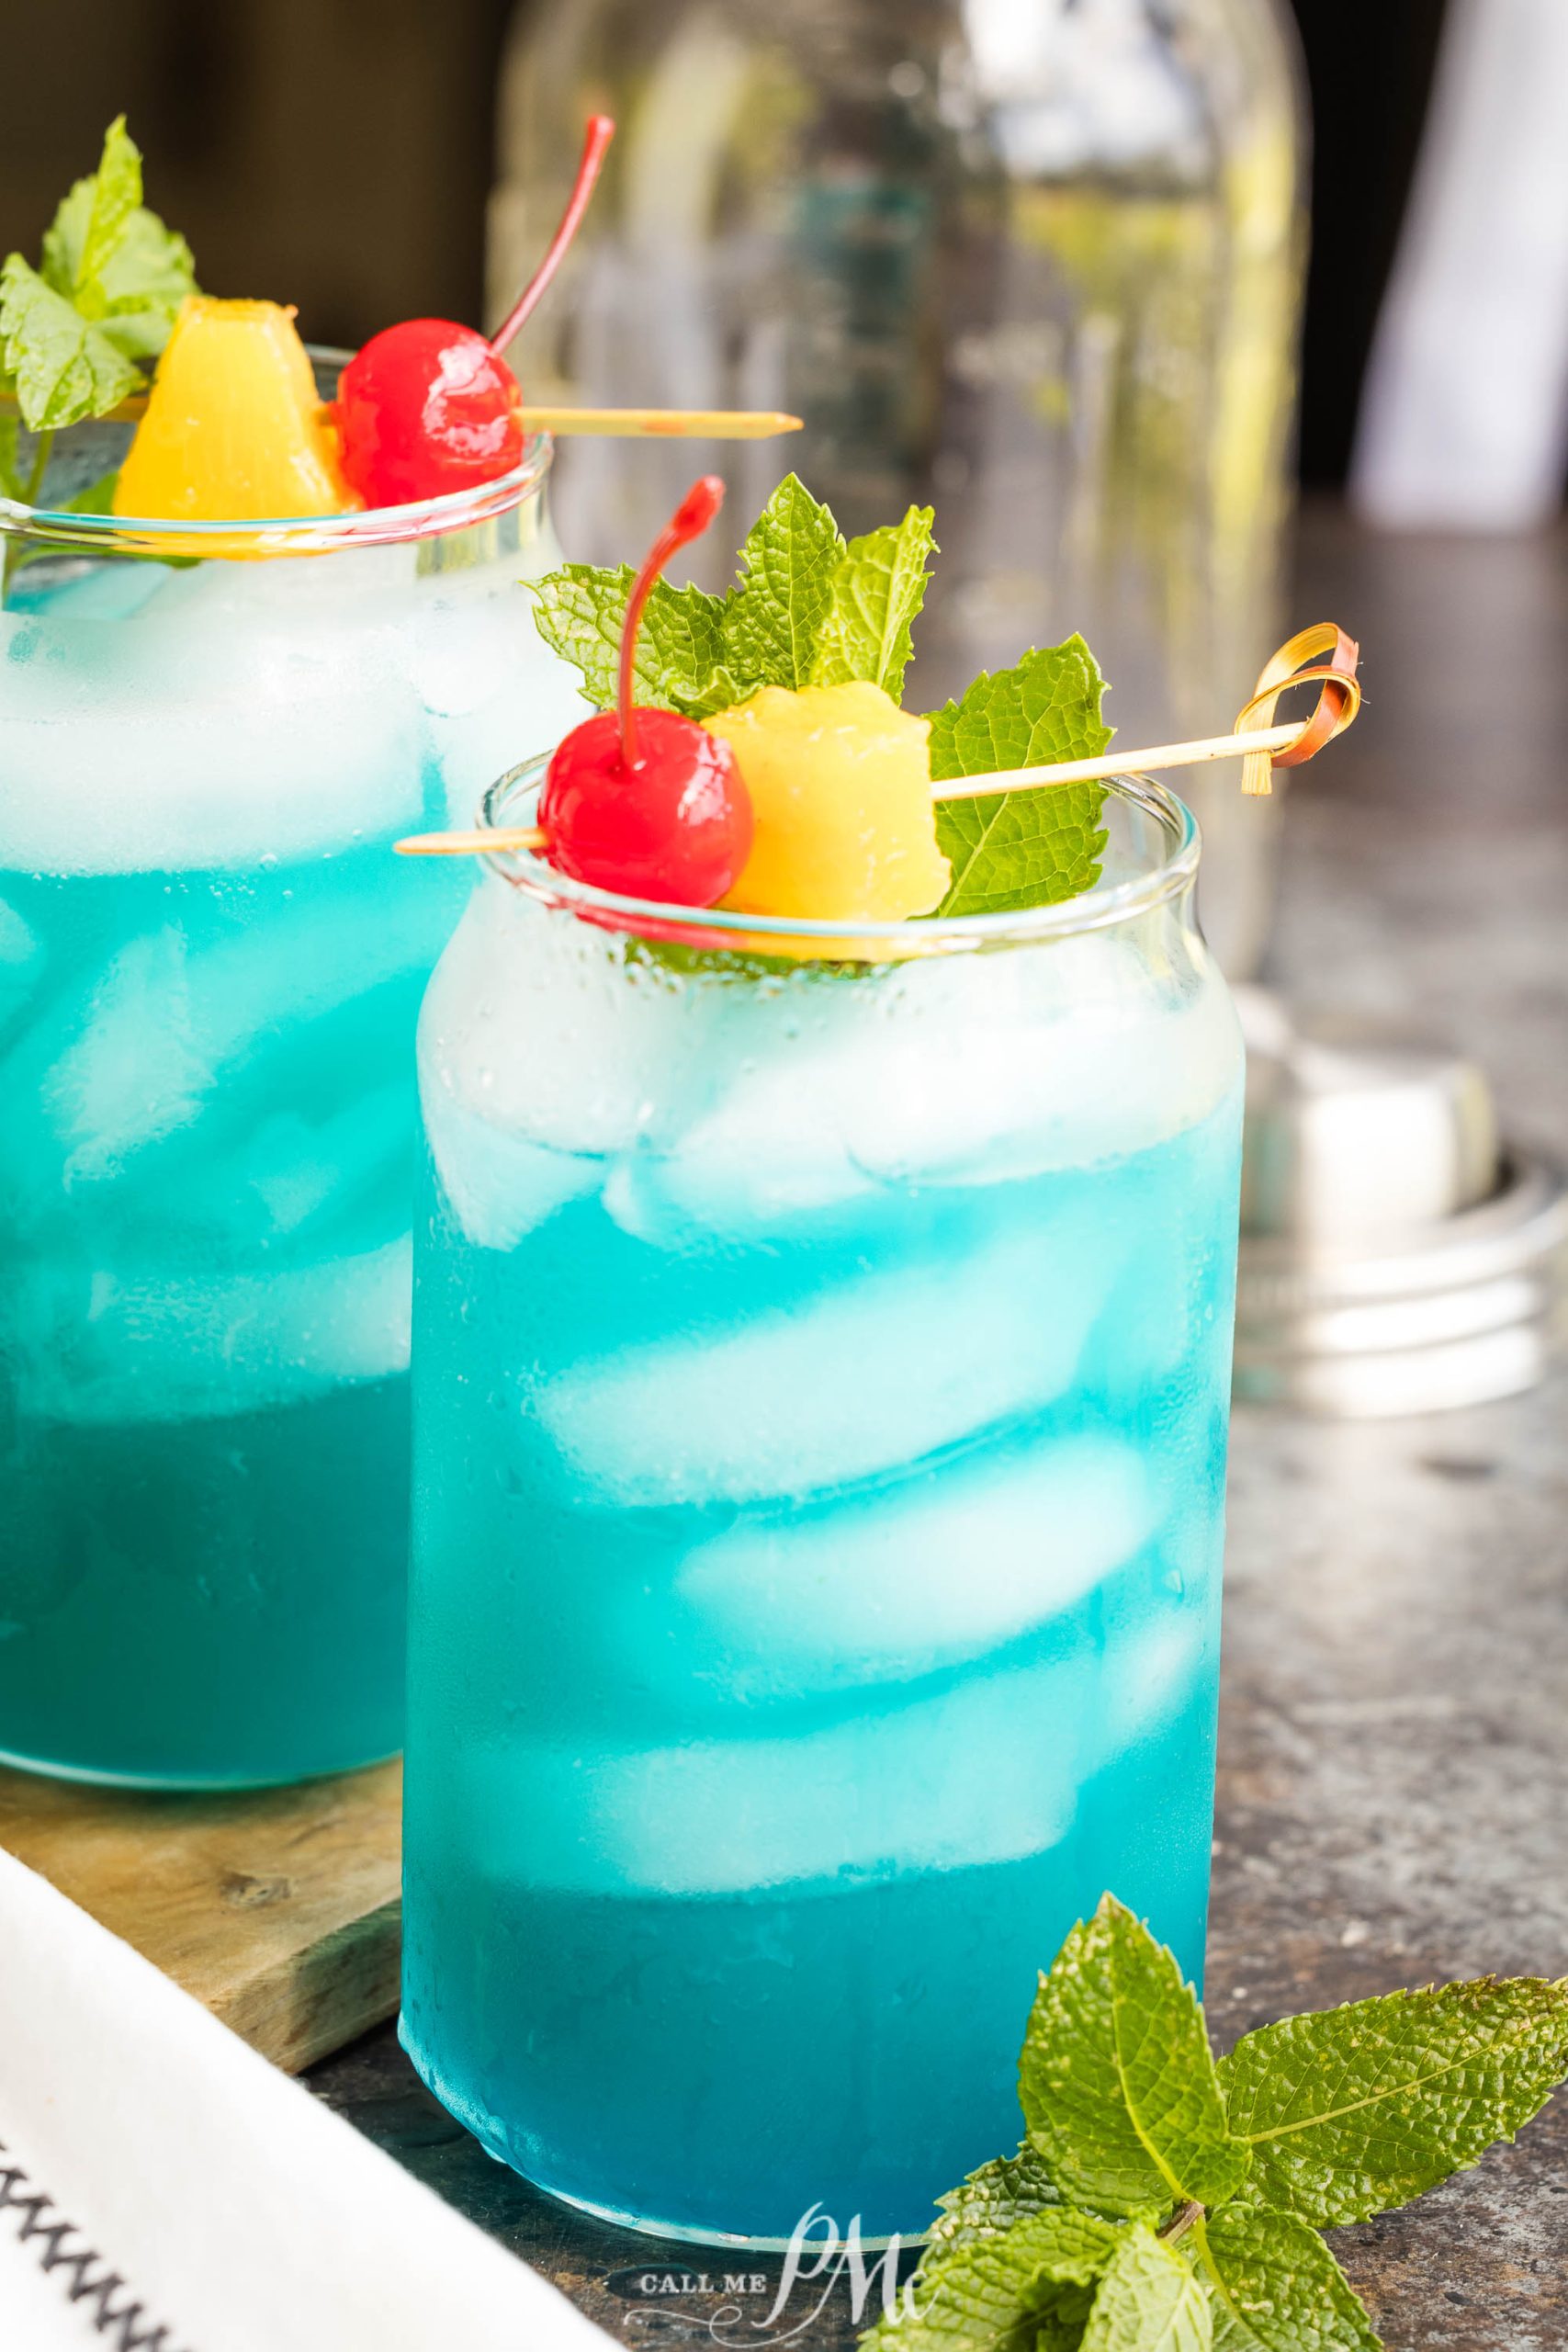 Two glasses of blue cocktails with ice, garnished with mint leaves, a maraschino cherry, and a pineapple chunk, are placed on a wooden board.